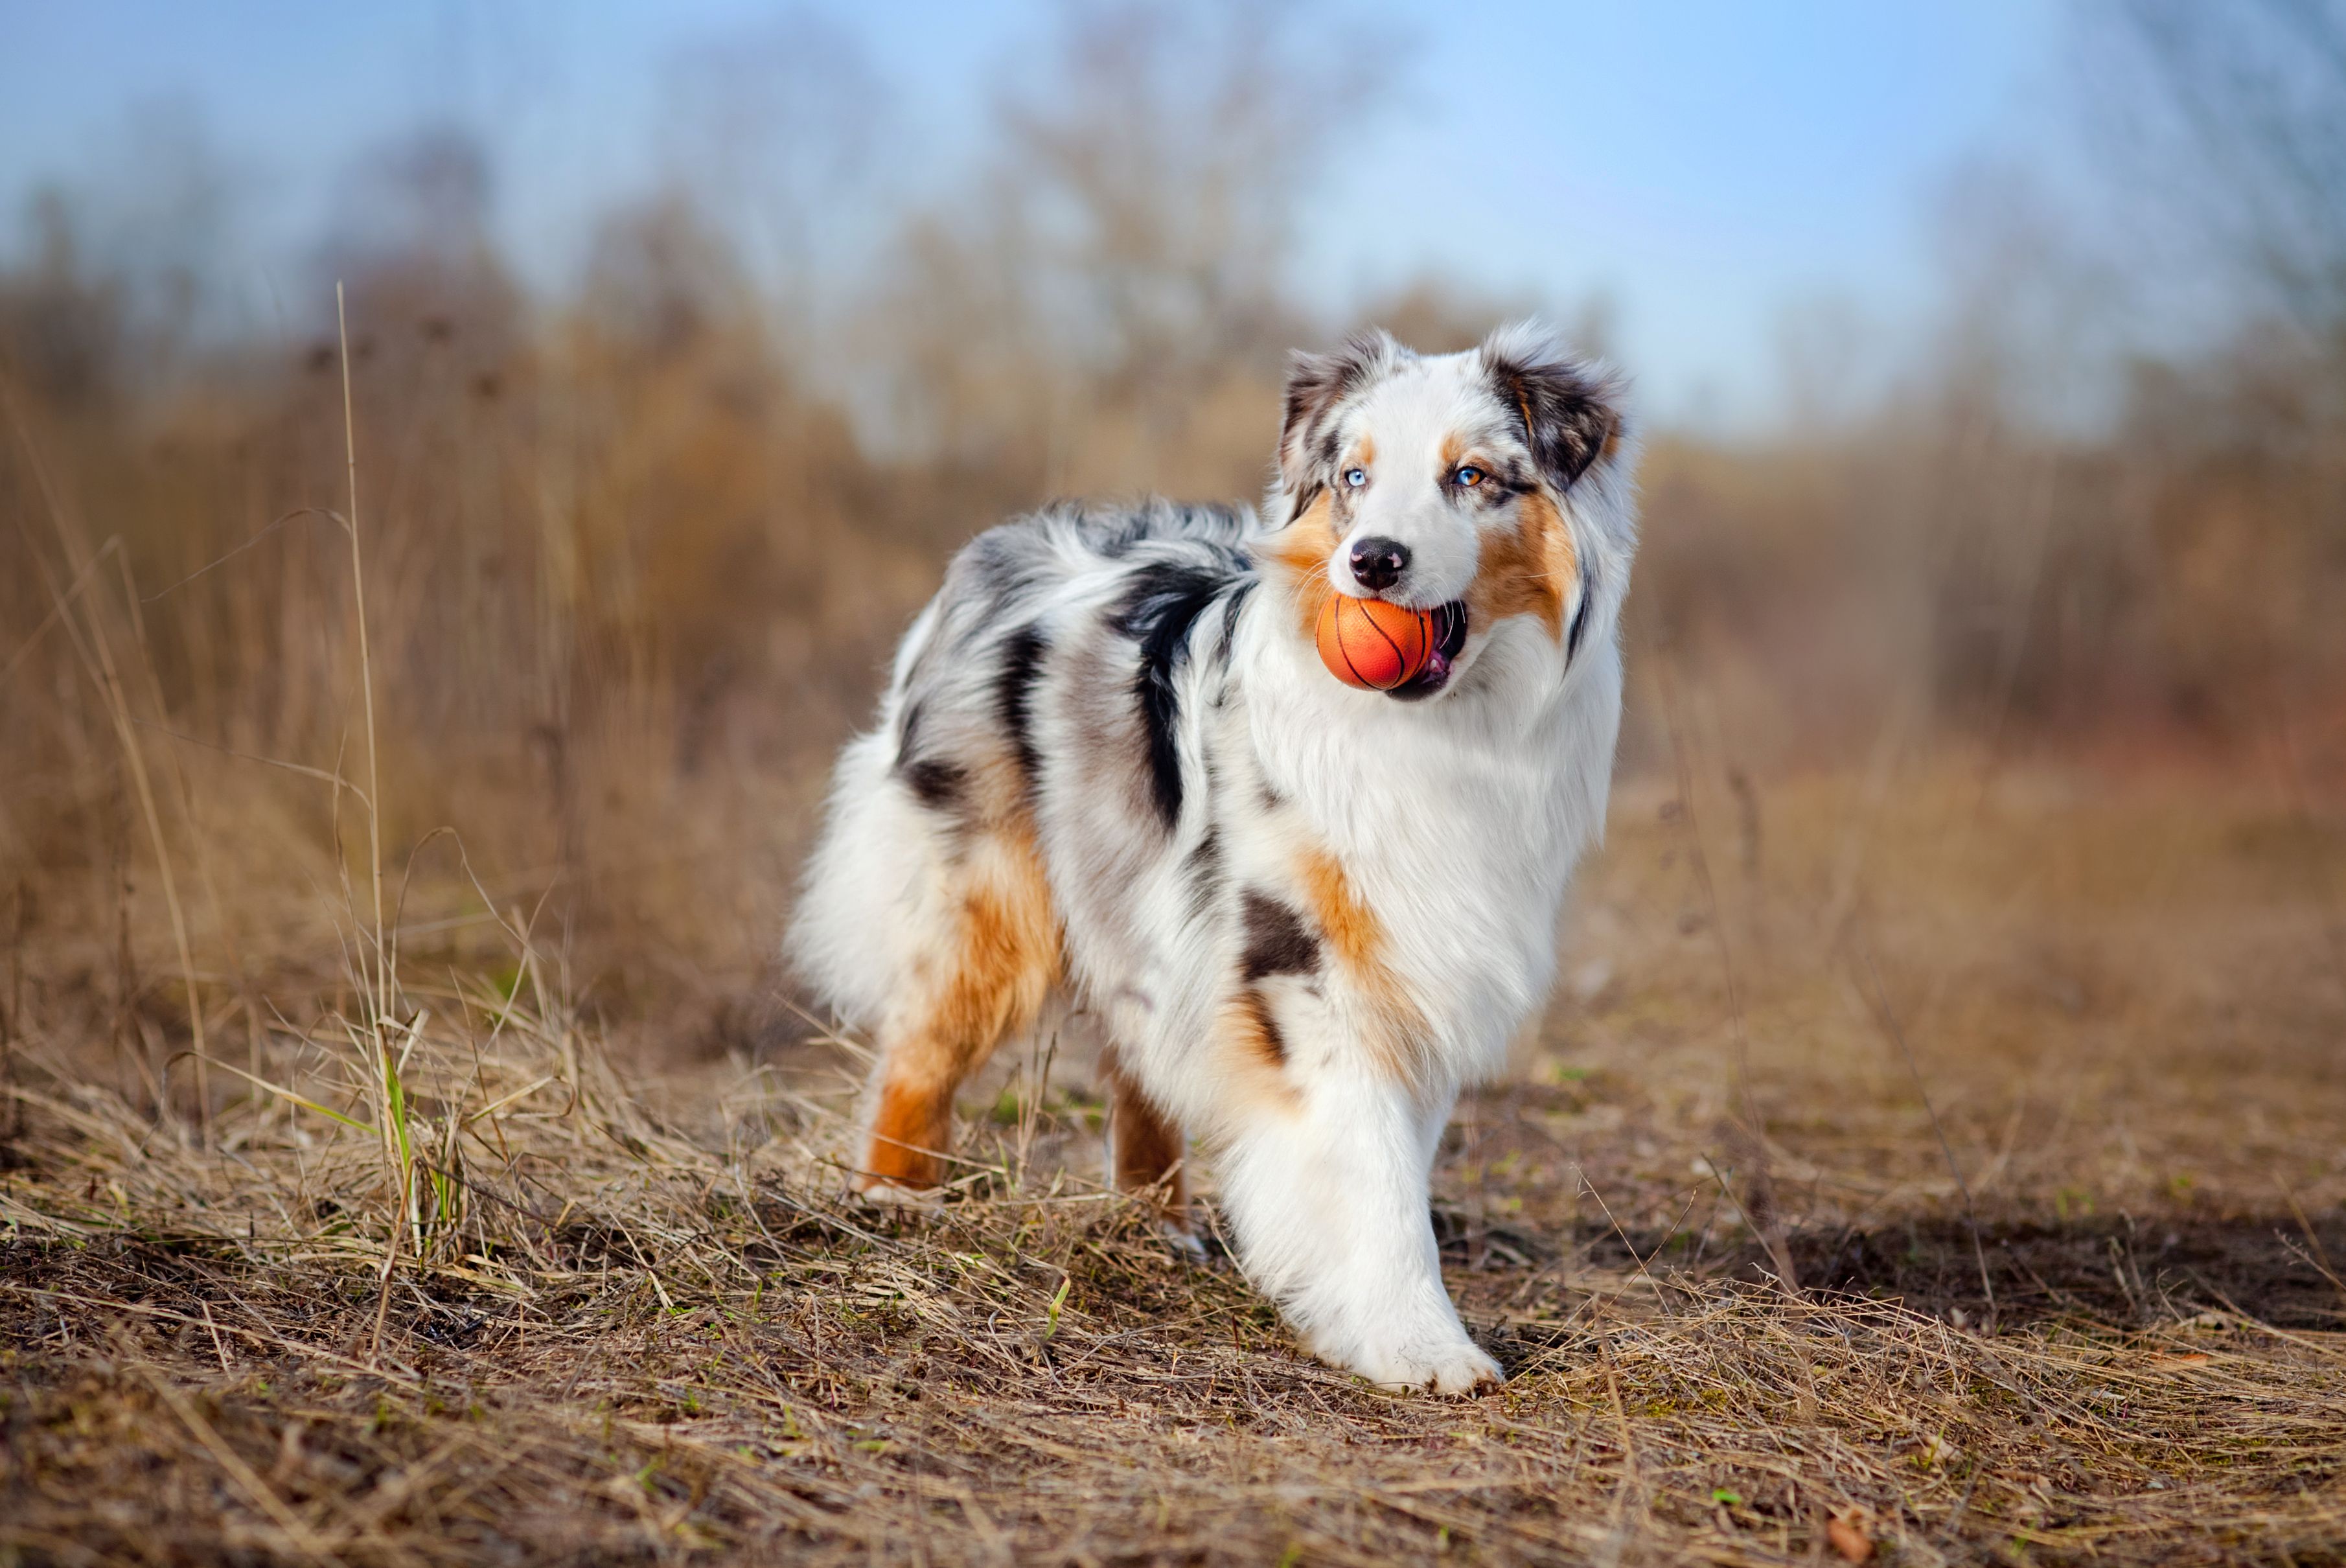 40 Best Medium Sized Dog Breeds That Are Popular for Families